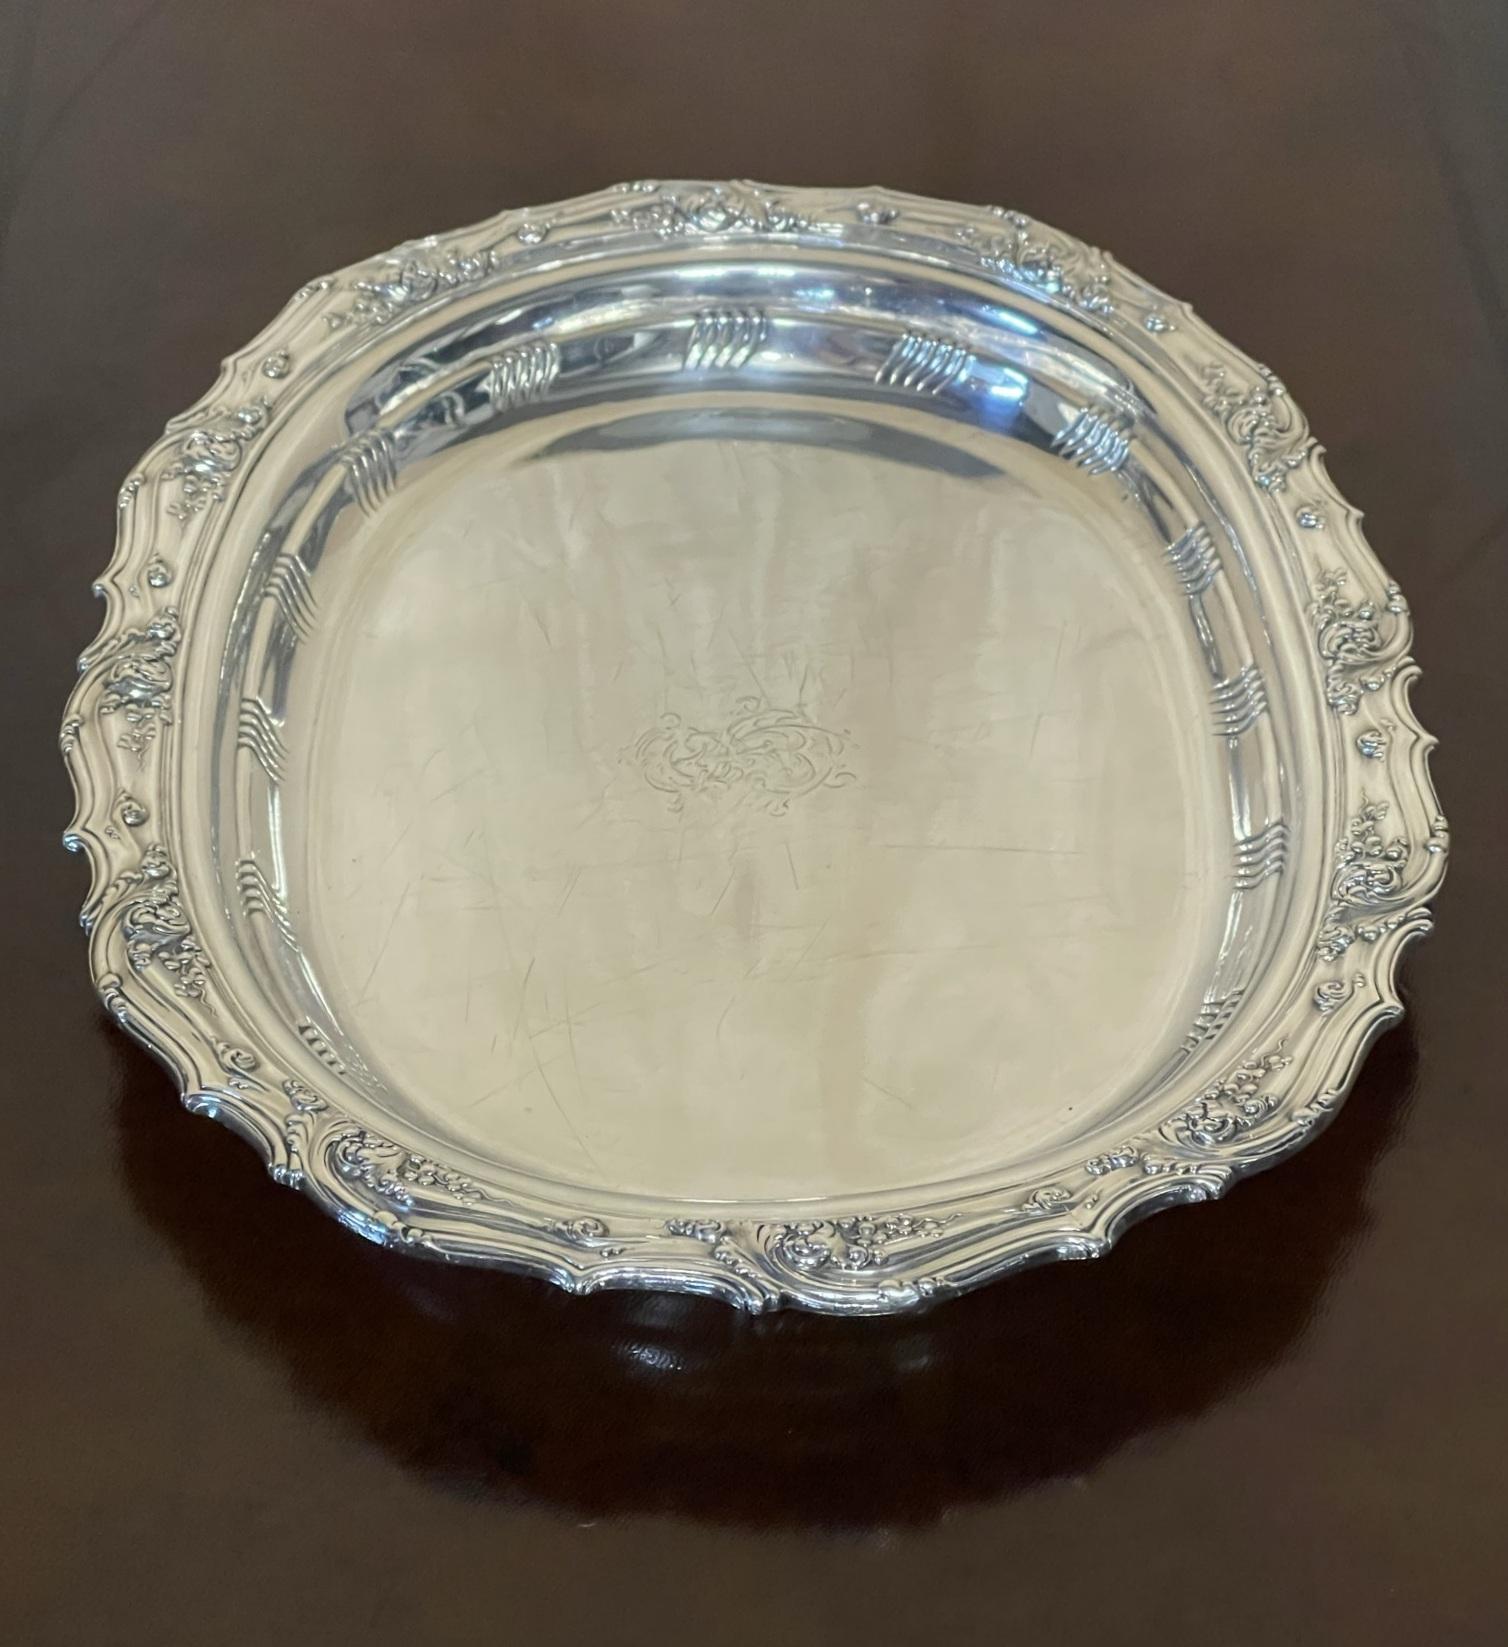 Super Collectable World Fair Chicago 1893 Antique Tiffany & Co. Sterling Tray For Sale 7